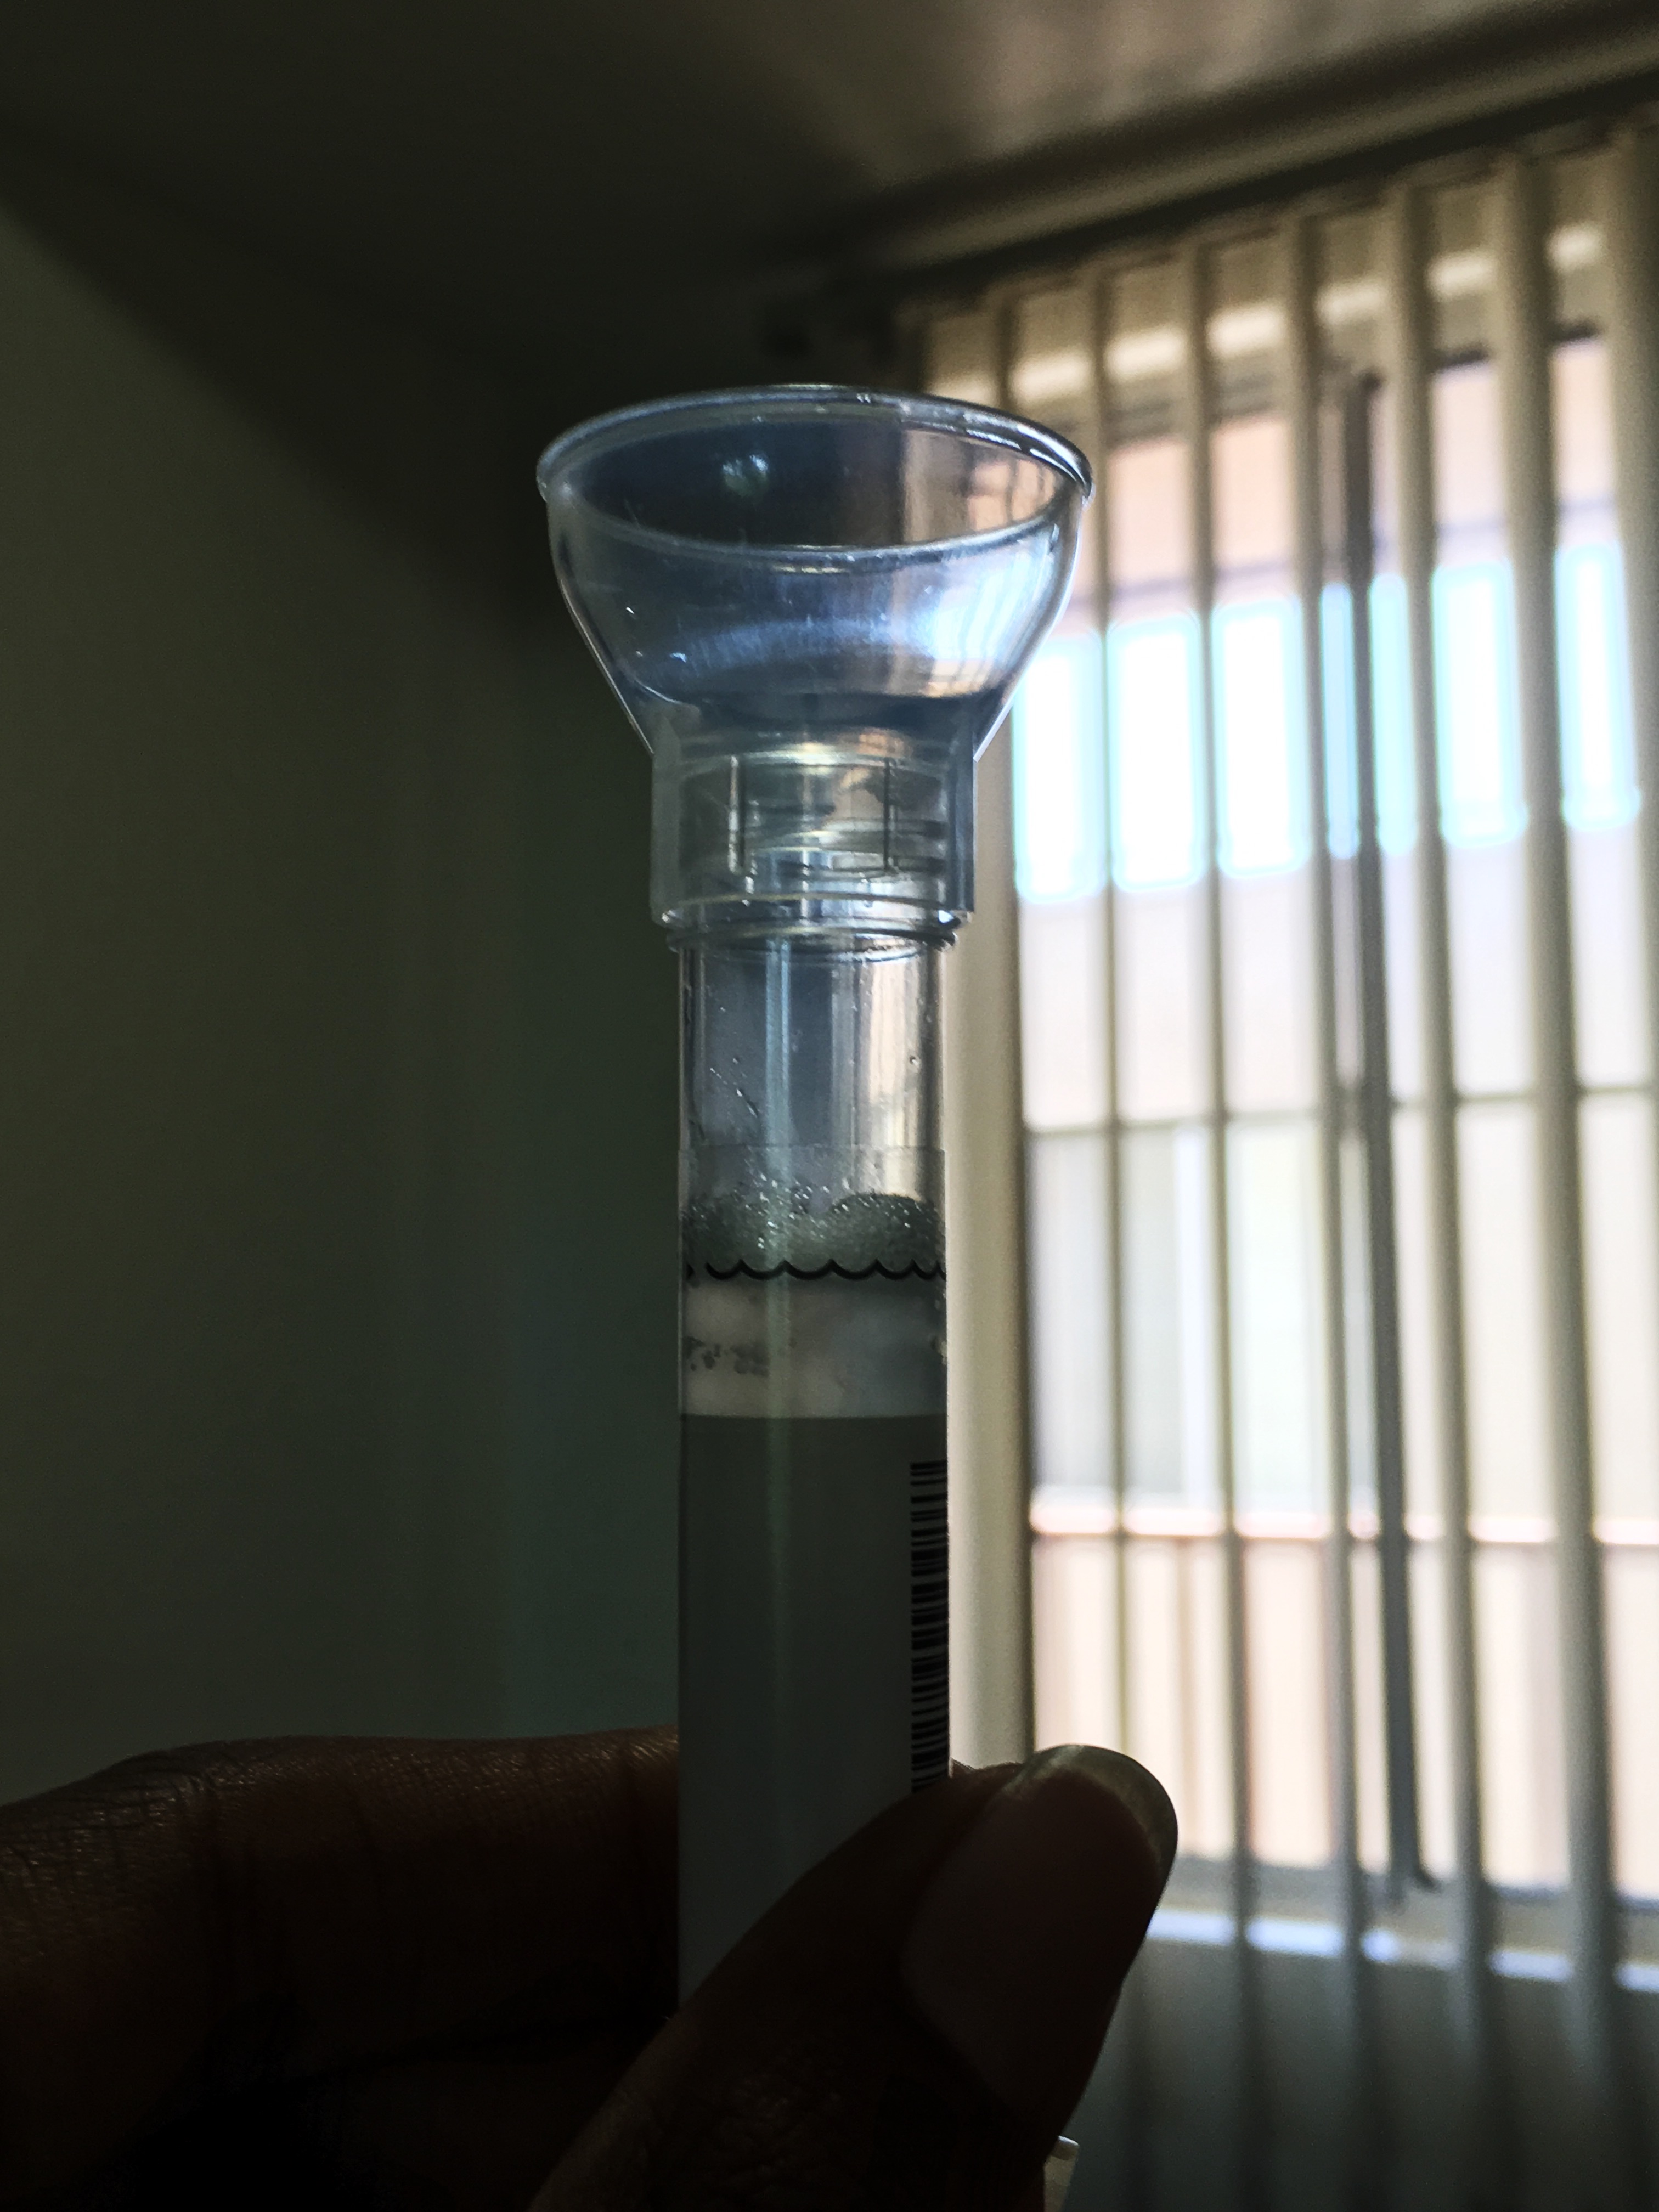 ancetry dna sample tube